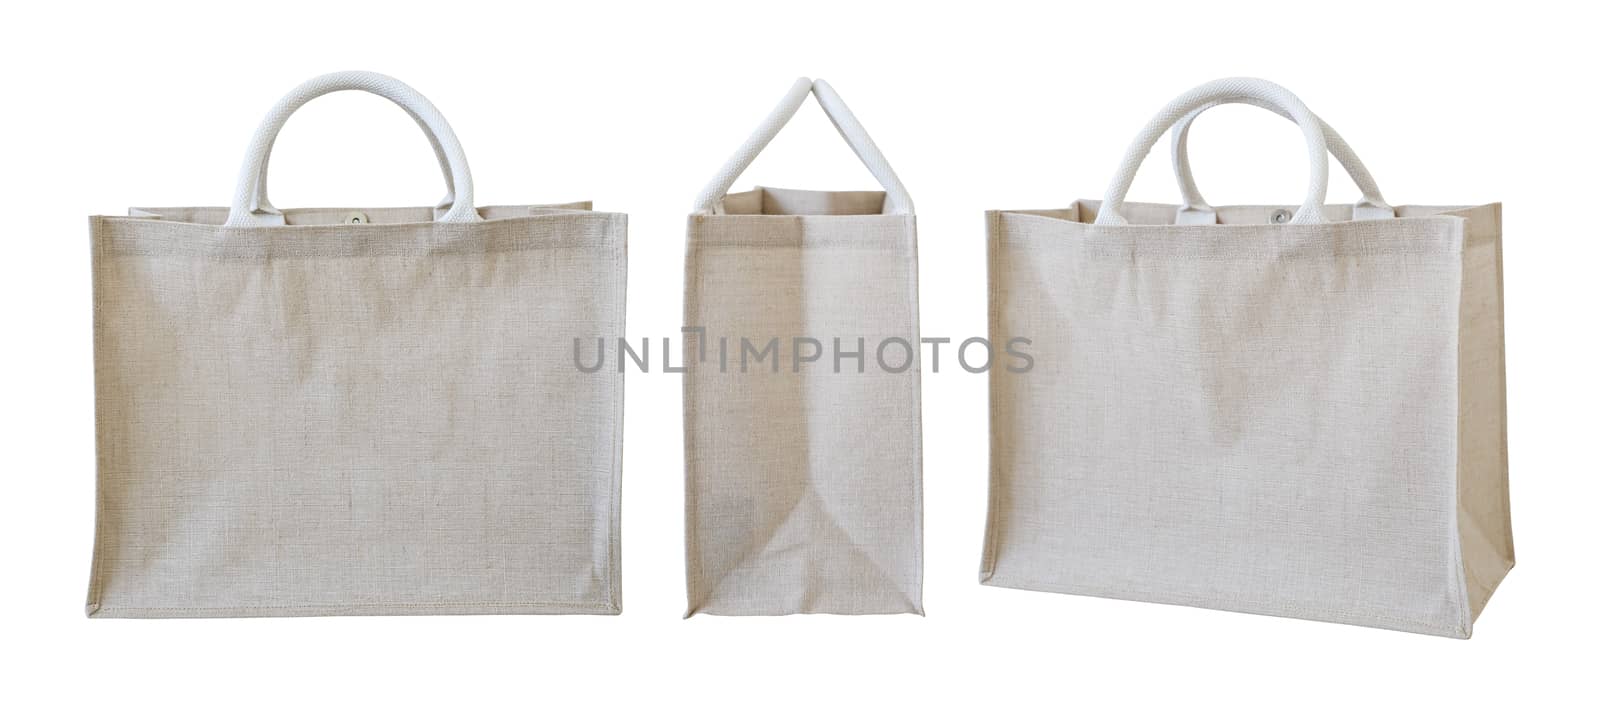 Sackcloth bag isolated on white background by Myimagine